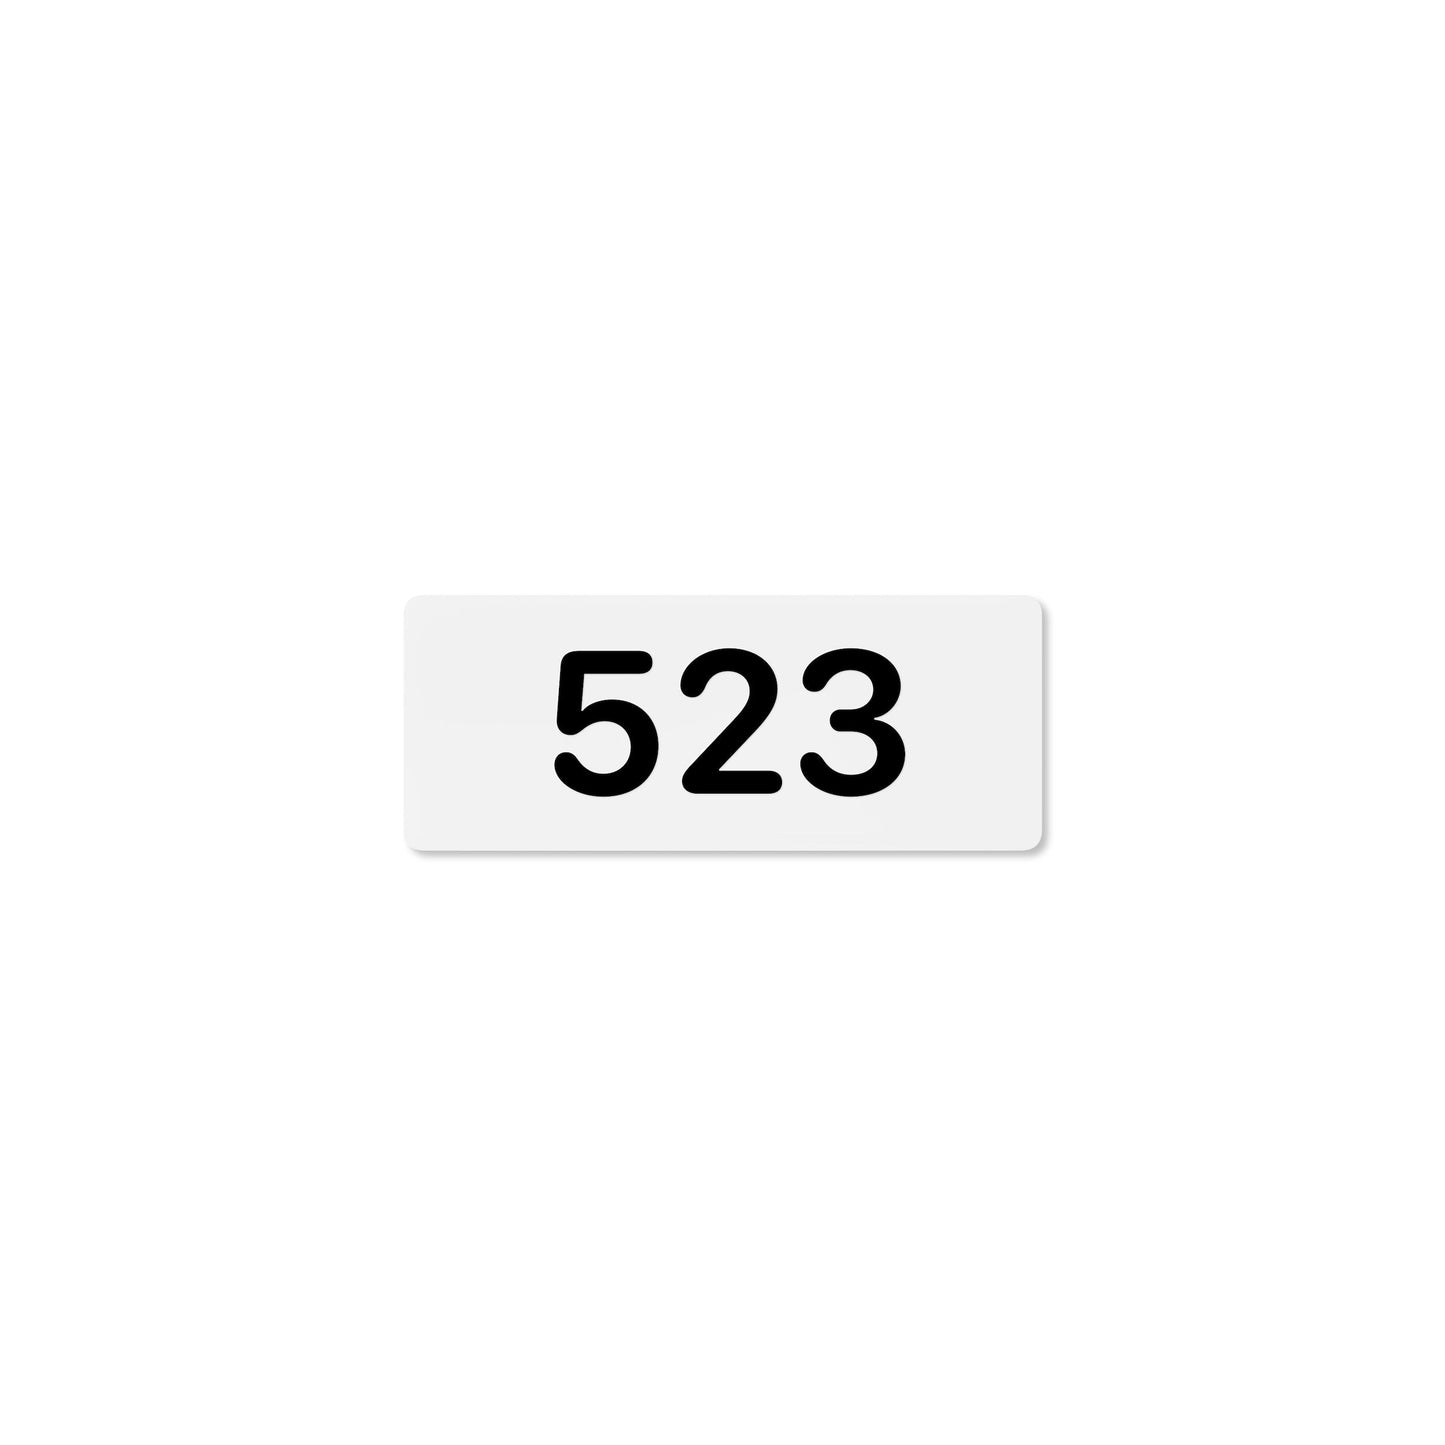 Numeral 523